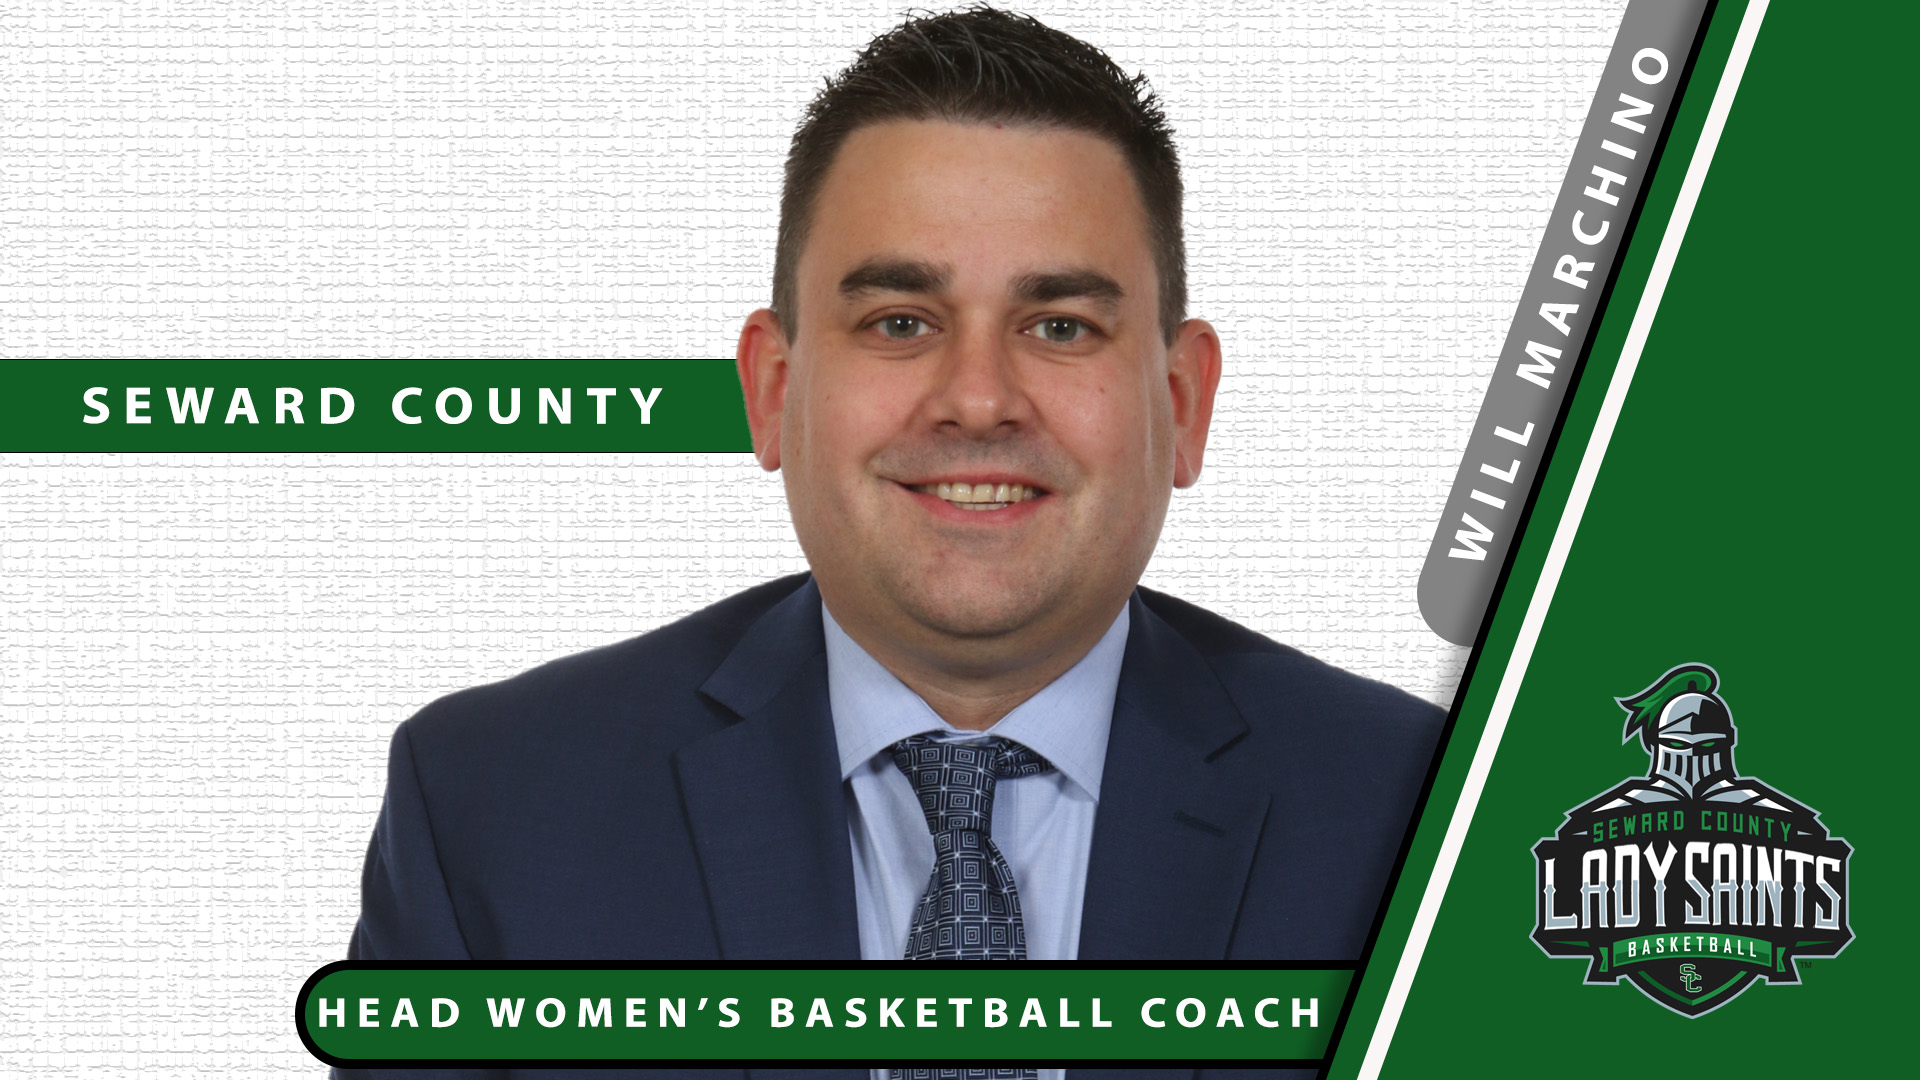 Marchino selected to lead the Women's Basketball Program at Seward County